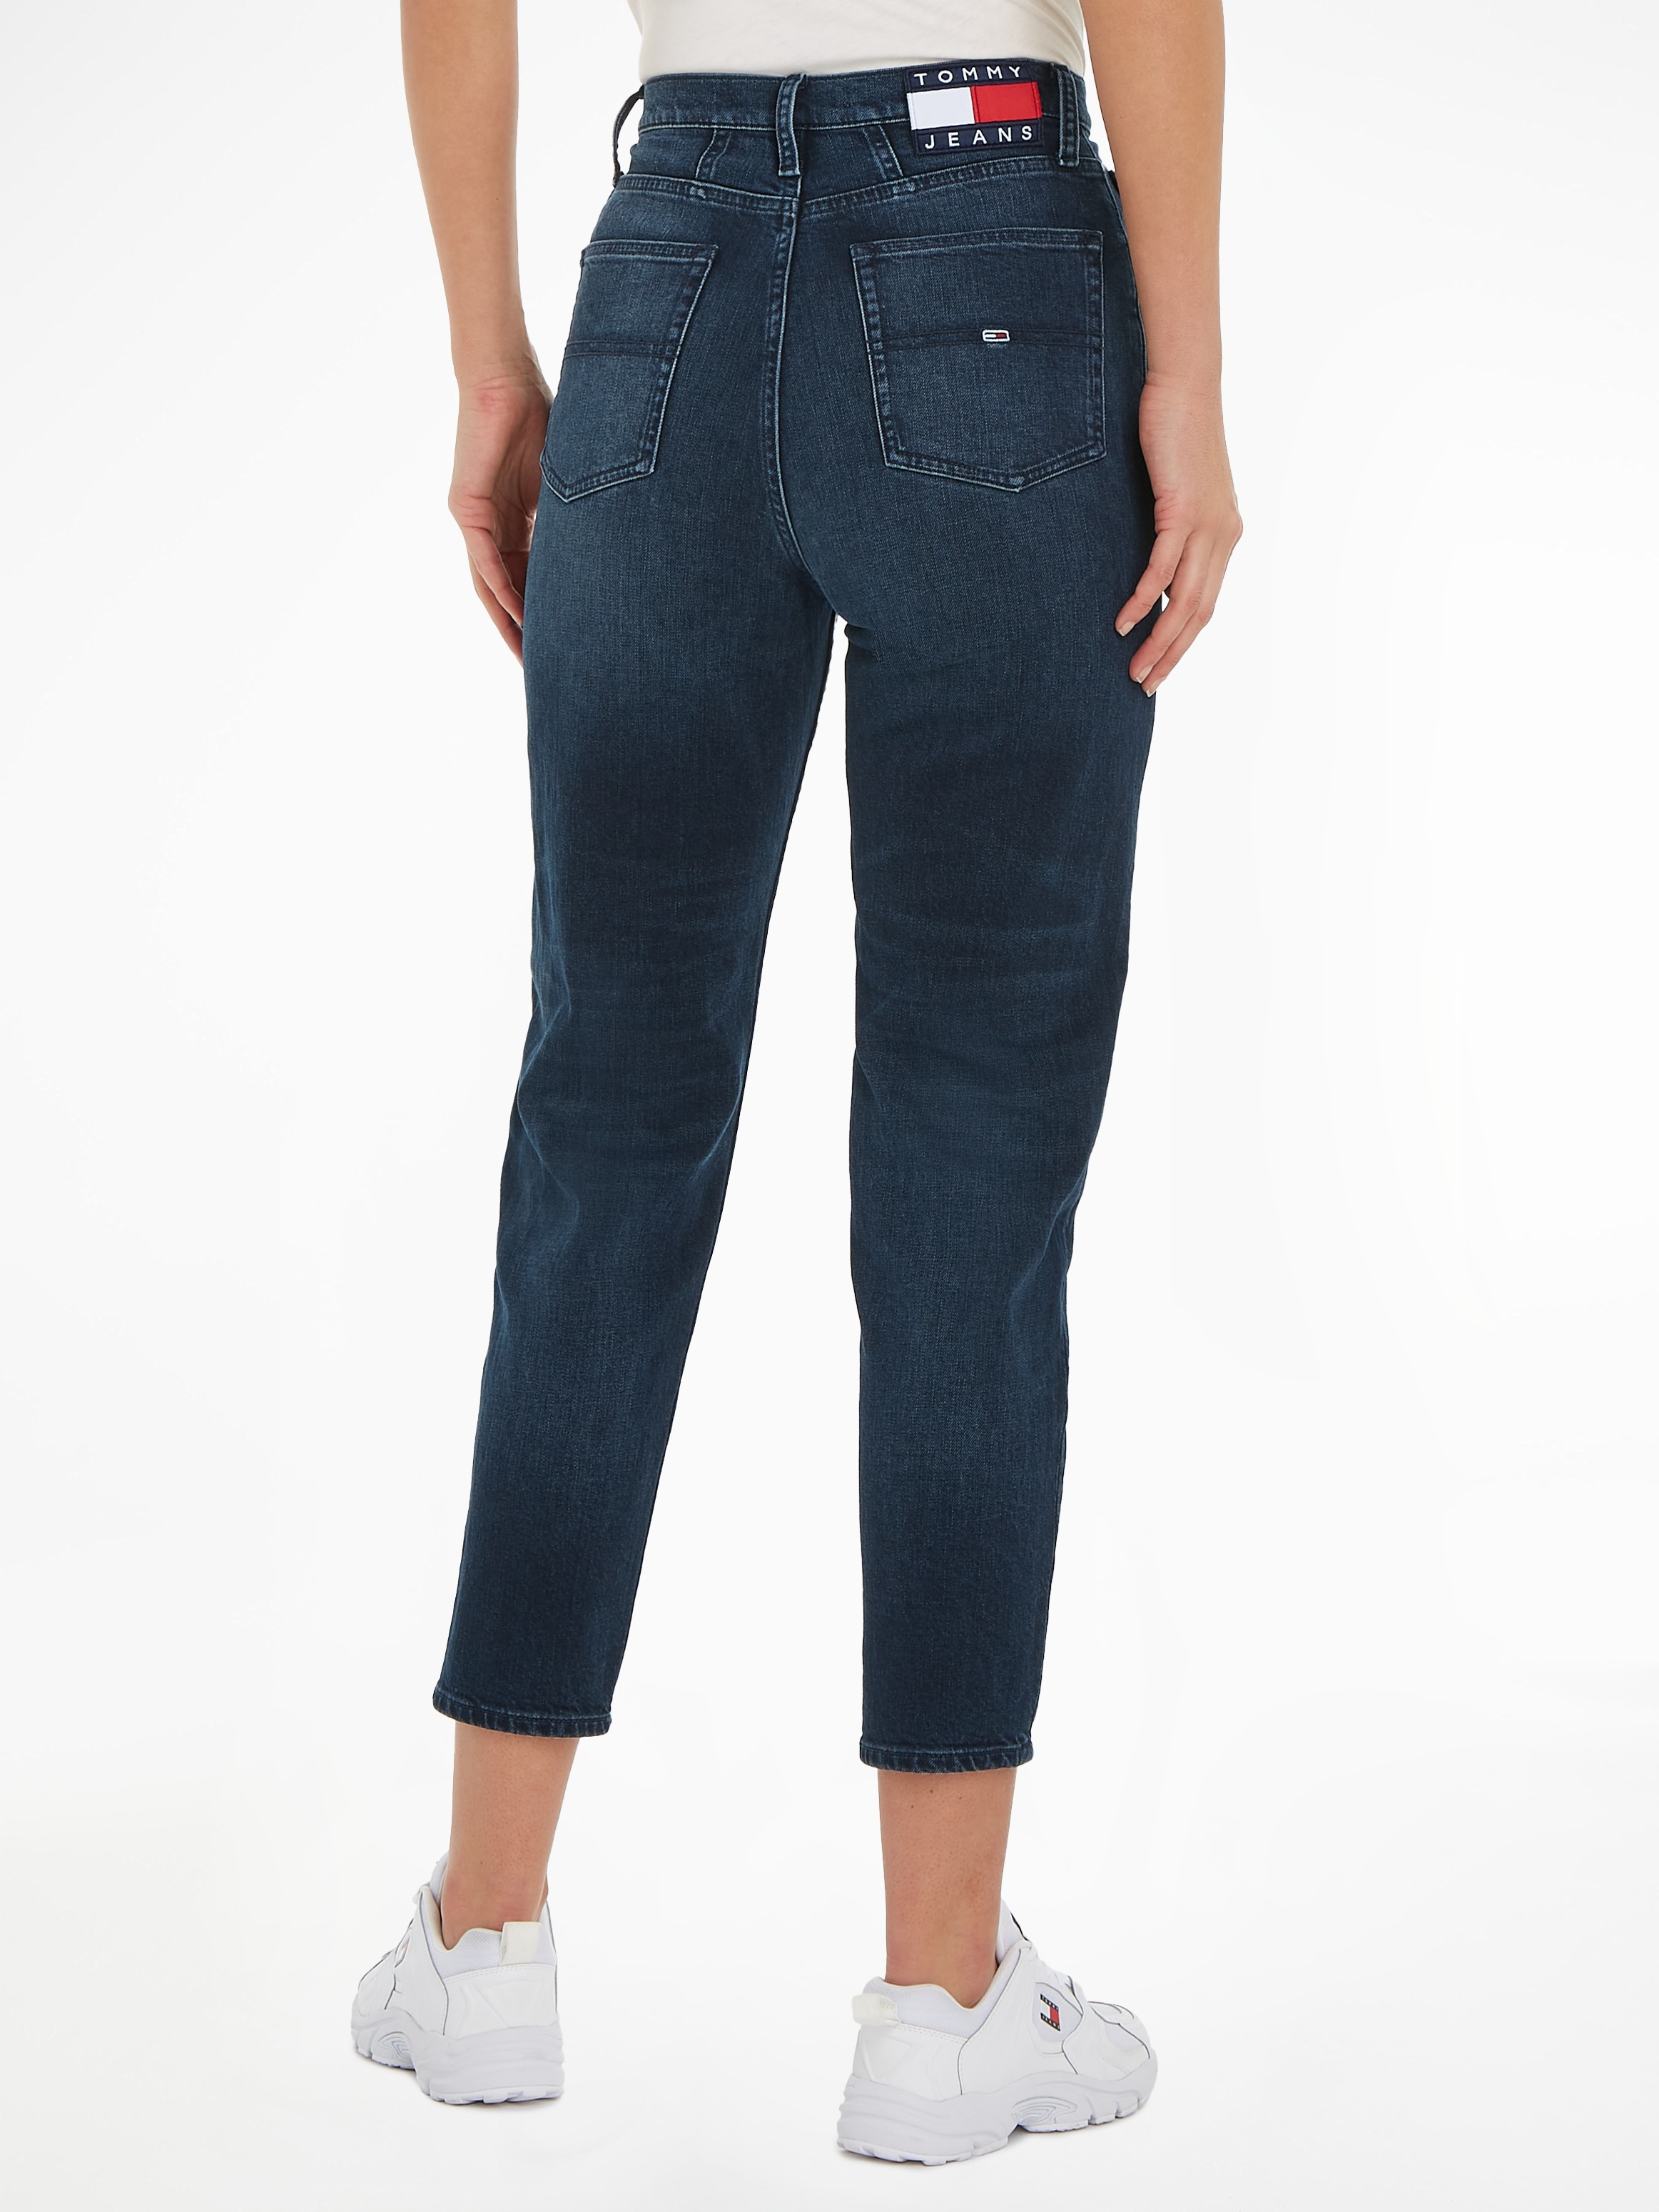 ♕ mit TPR Logobadge und bei Labelflags Tommy CG5136«, JEAN UHR Mom-Jeans »MOM Jeans